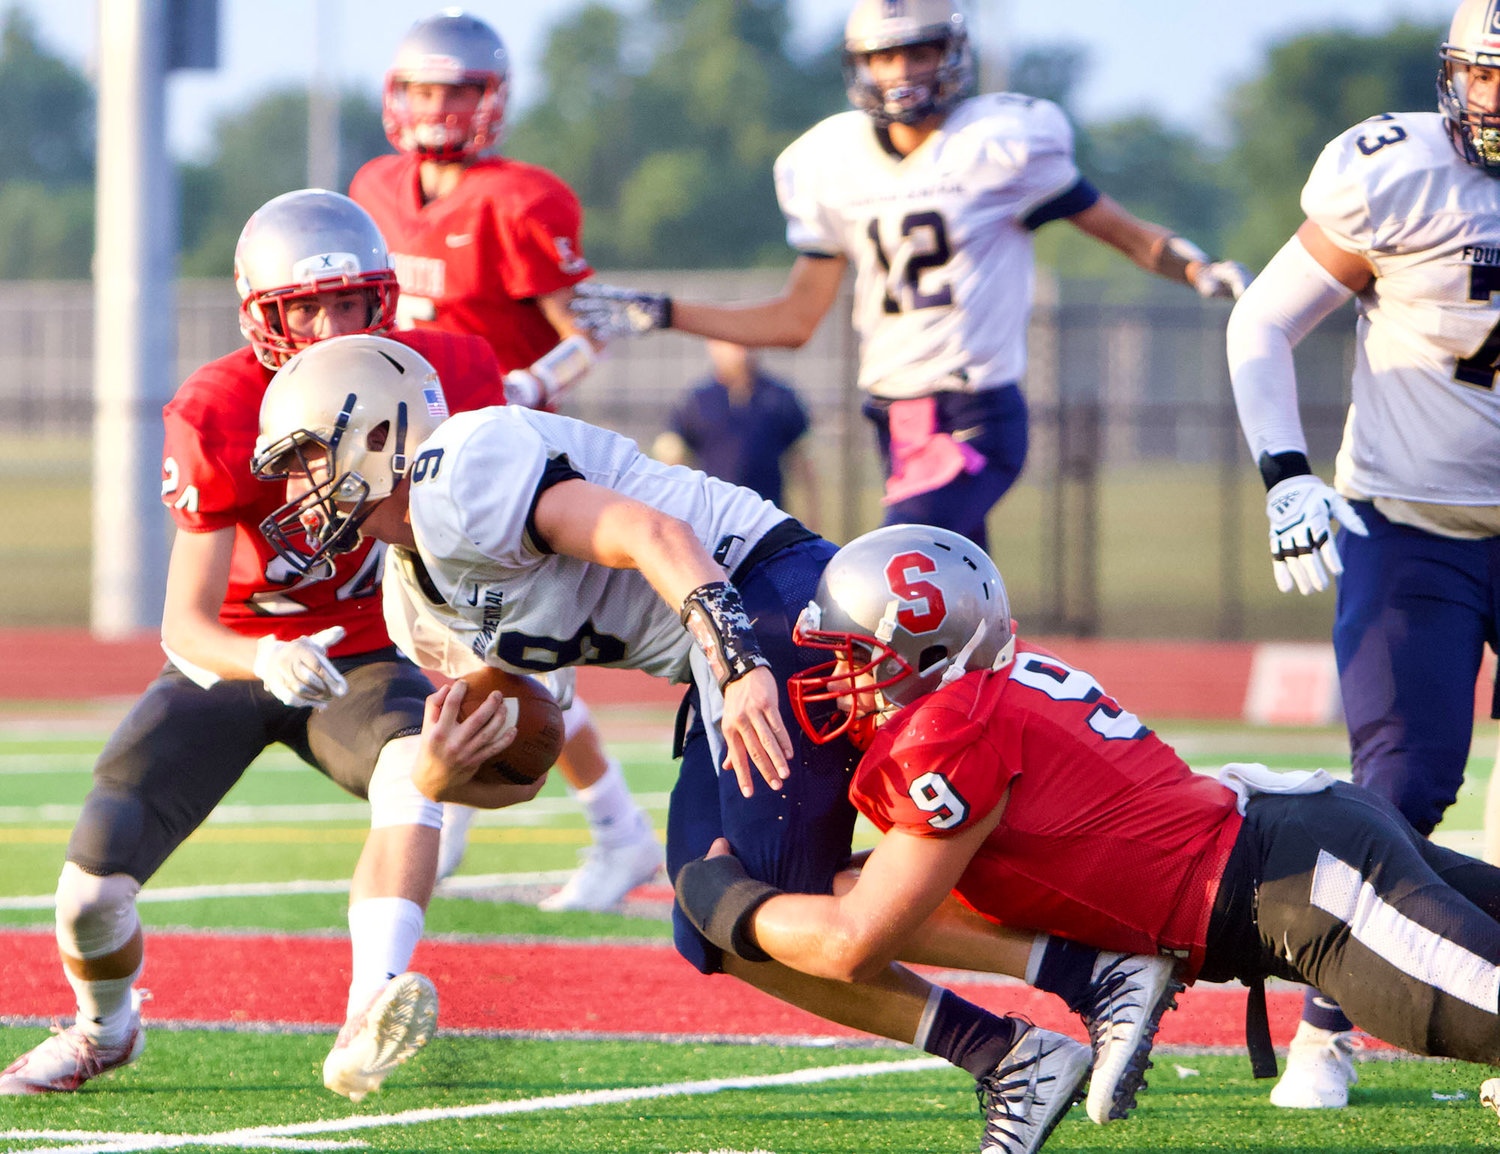 Fountain Central’s Owen Acton gets close to the goal line Friday as Southmont’s Wyatt Woodall hangs on to make a stop..